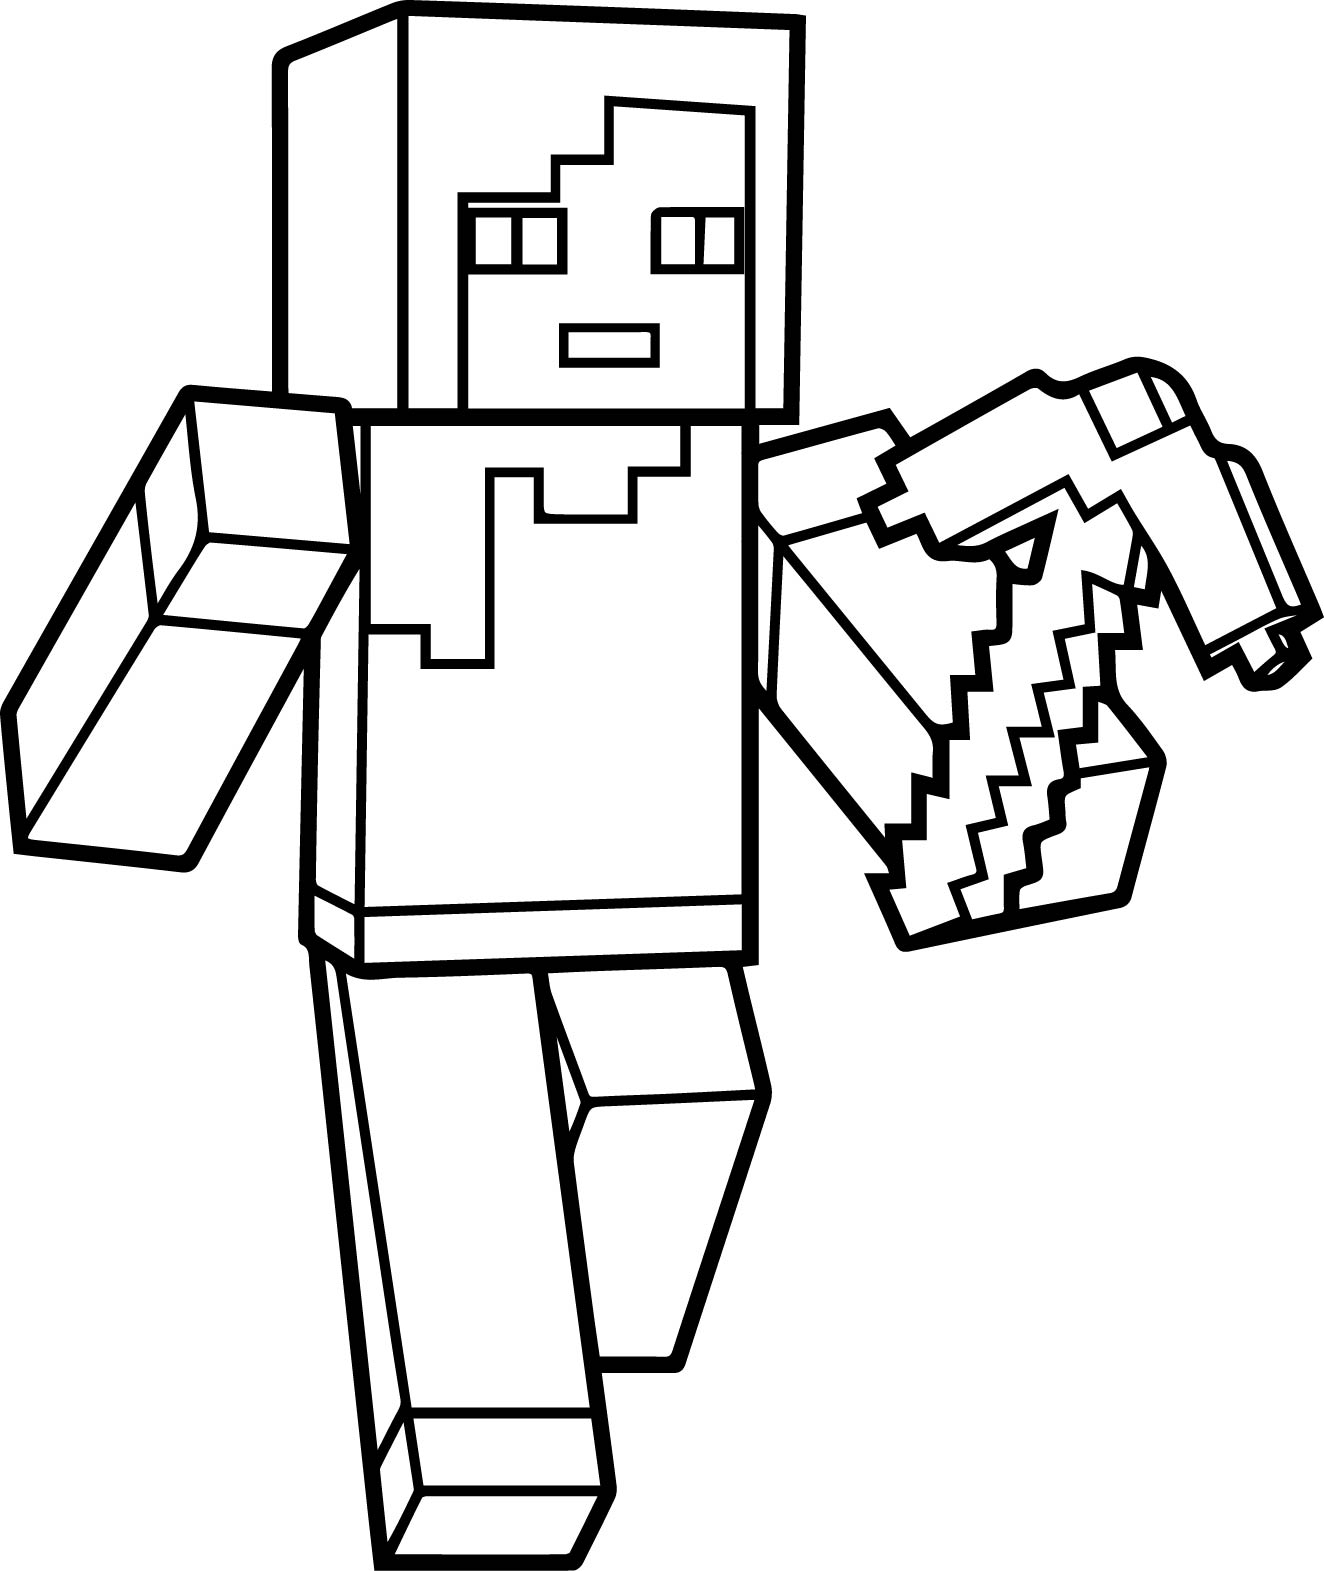 Minecraft Sheep Coloring Pages at GetDrawings   Free download